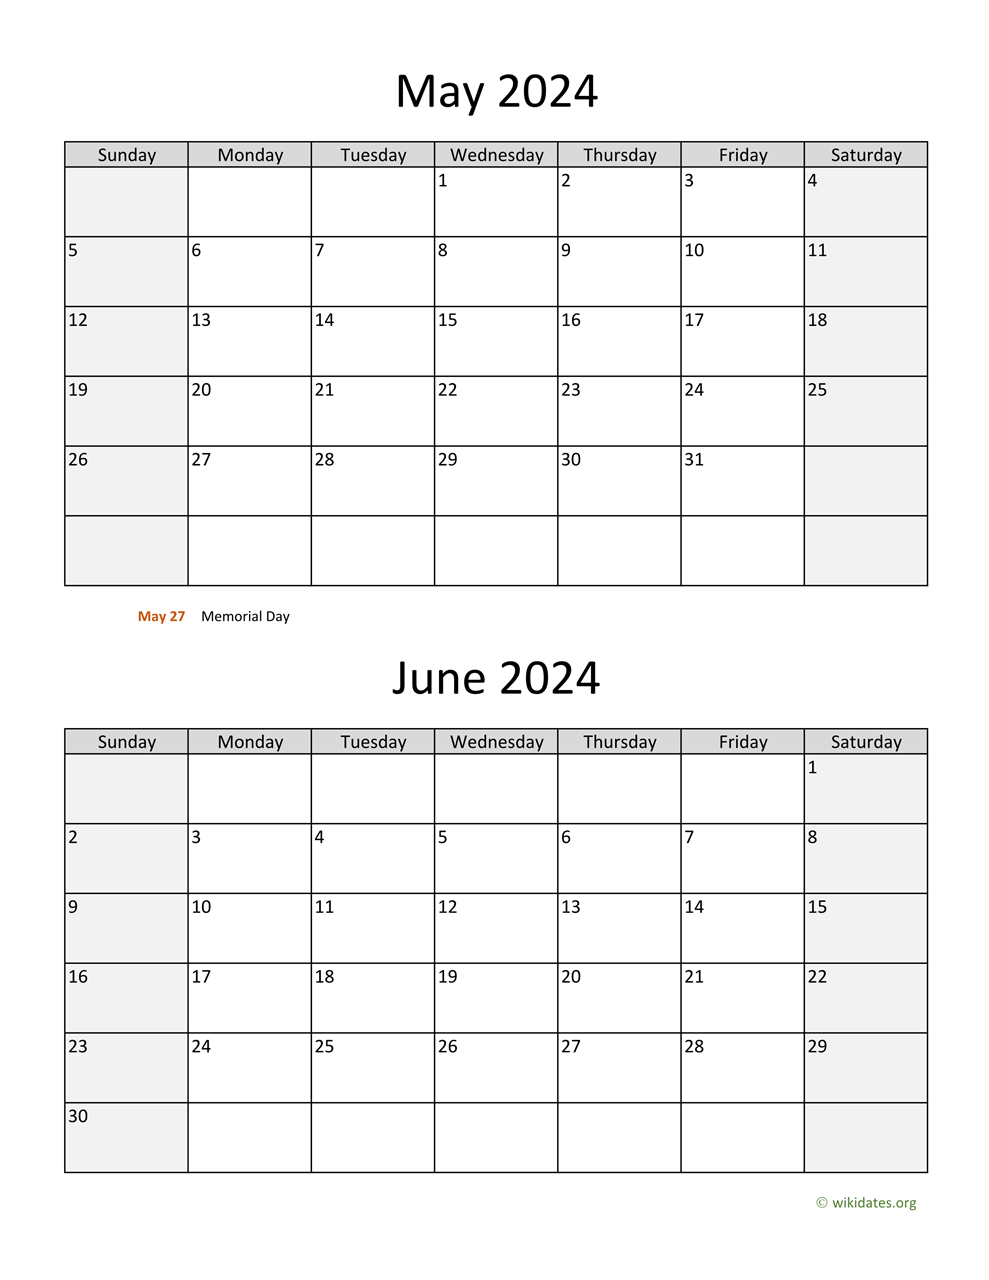 May And June 2024 Calendar | Wikidates for Printable Calendar May And June 2024